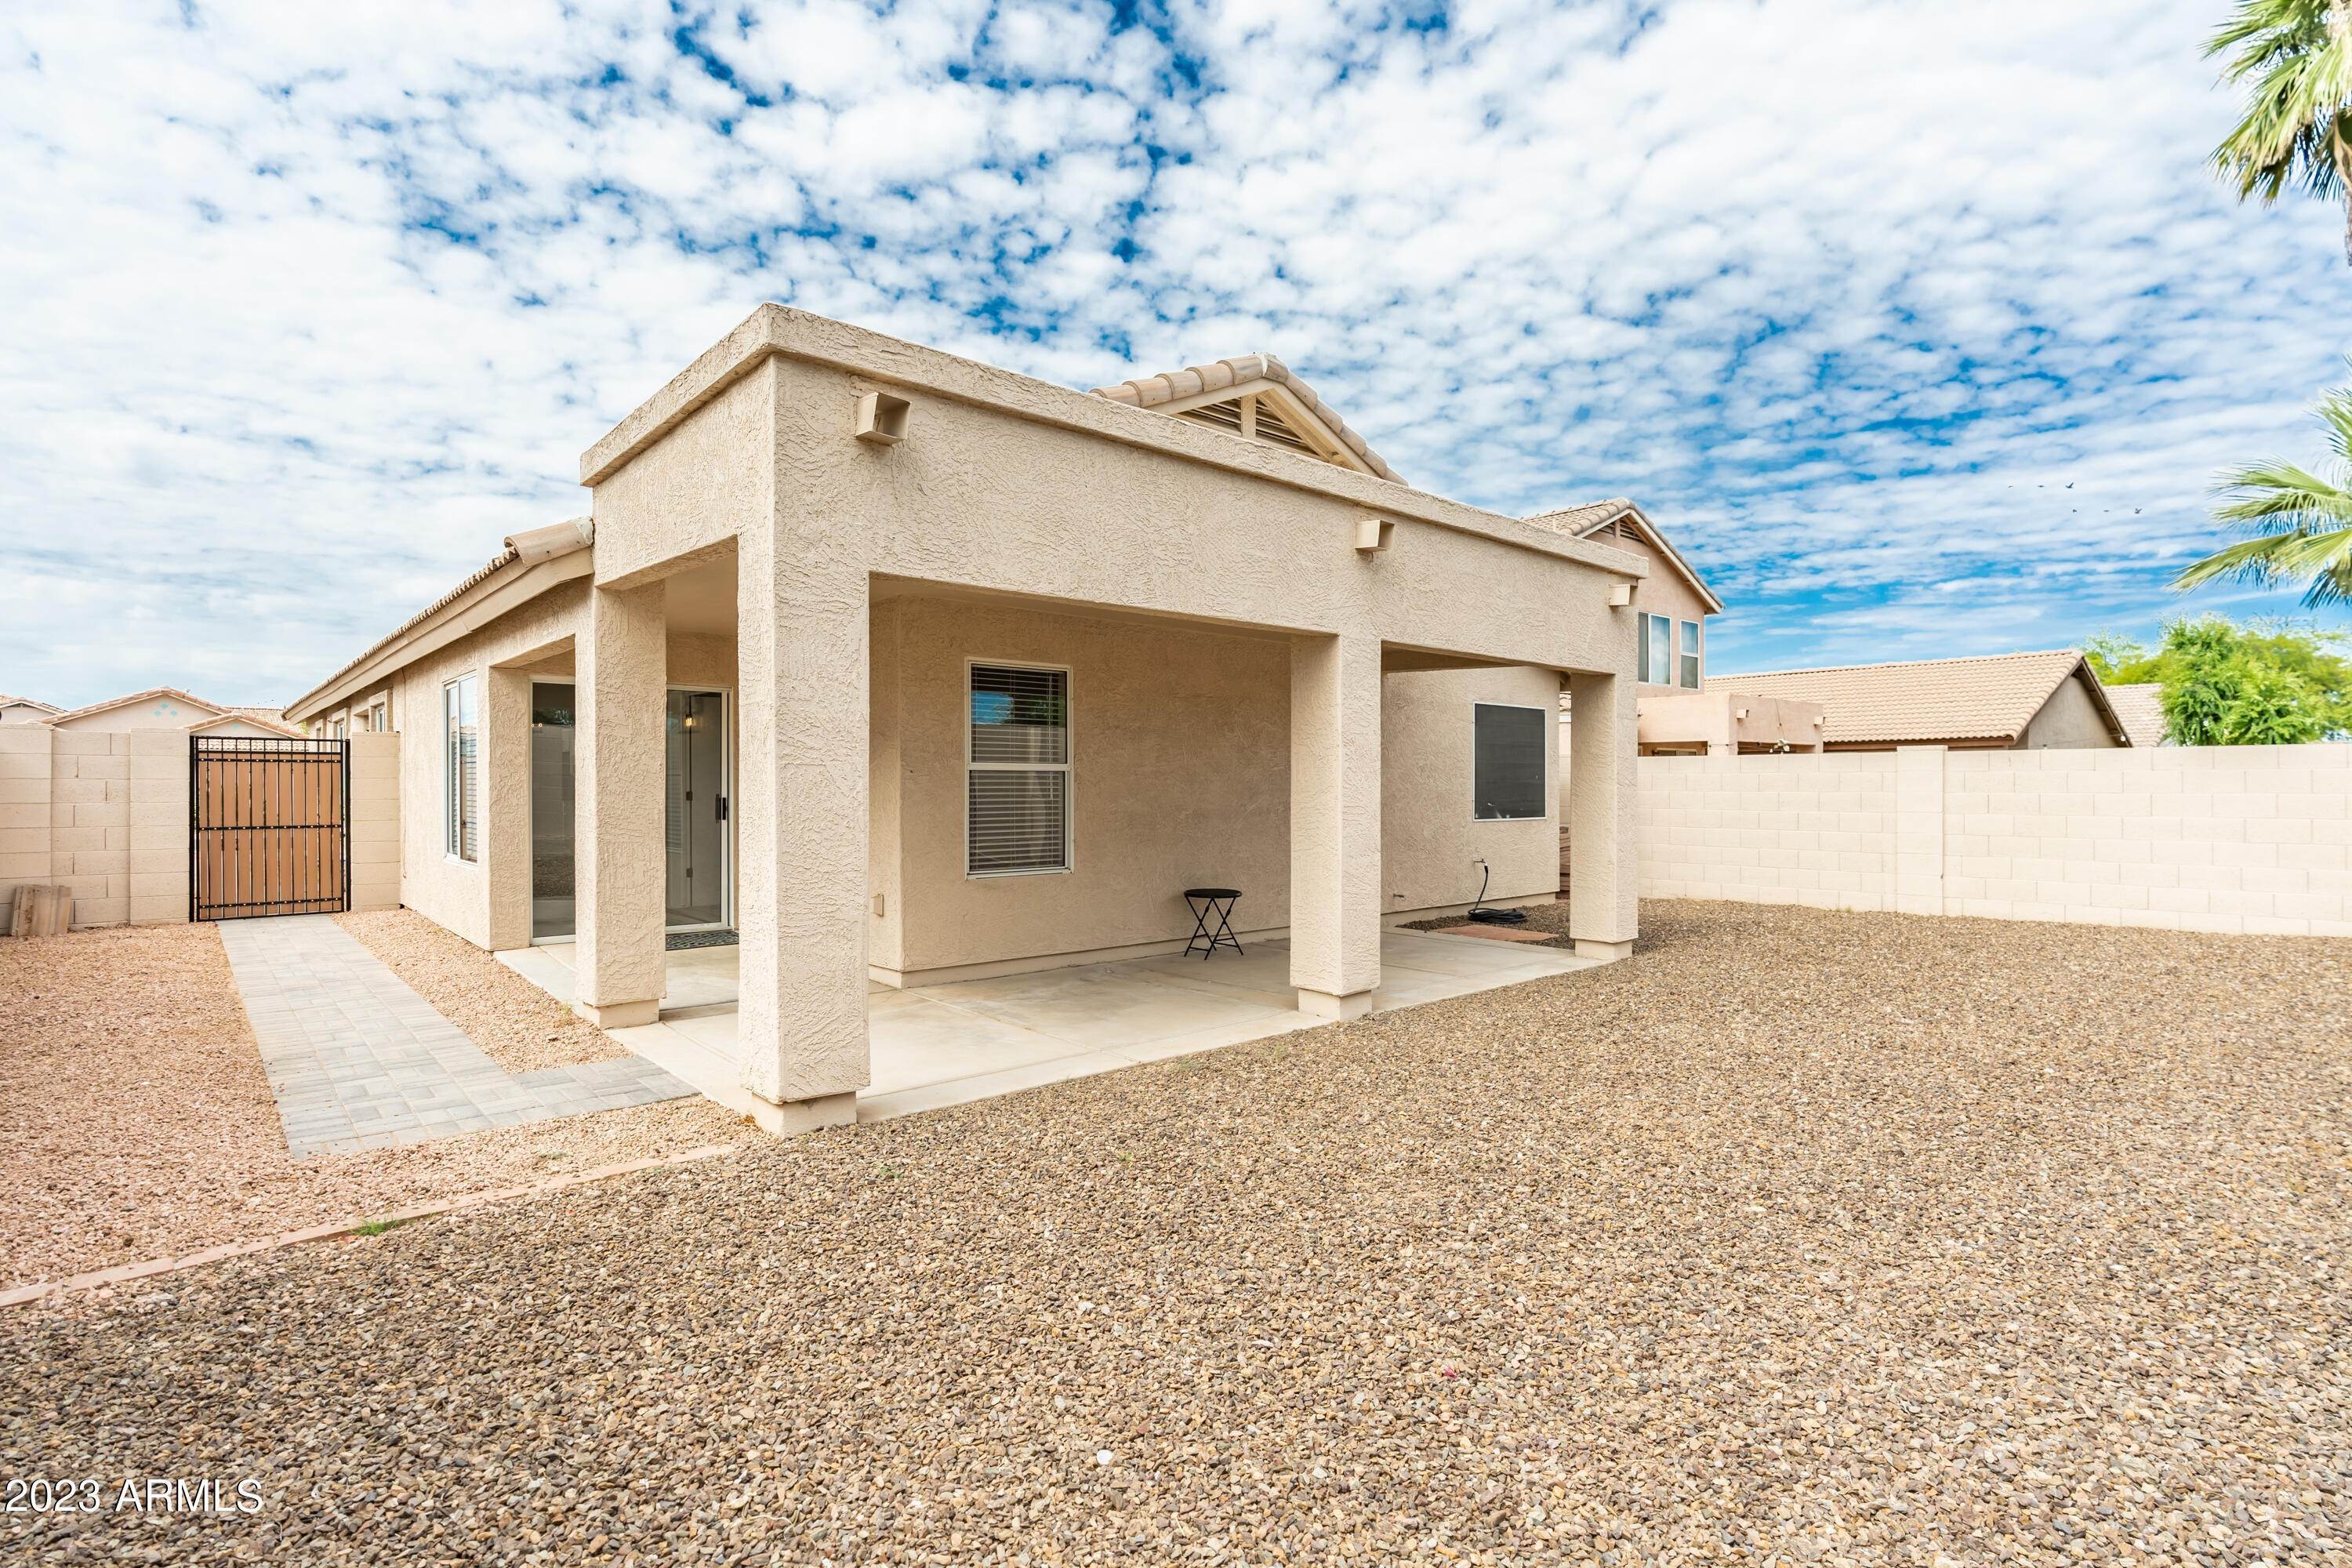 29. Single Family for Sale at Goodyear, AZ 85395